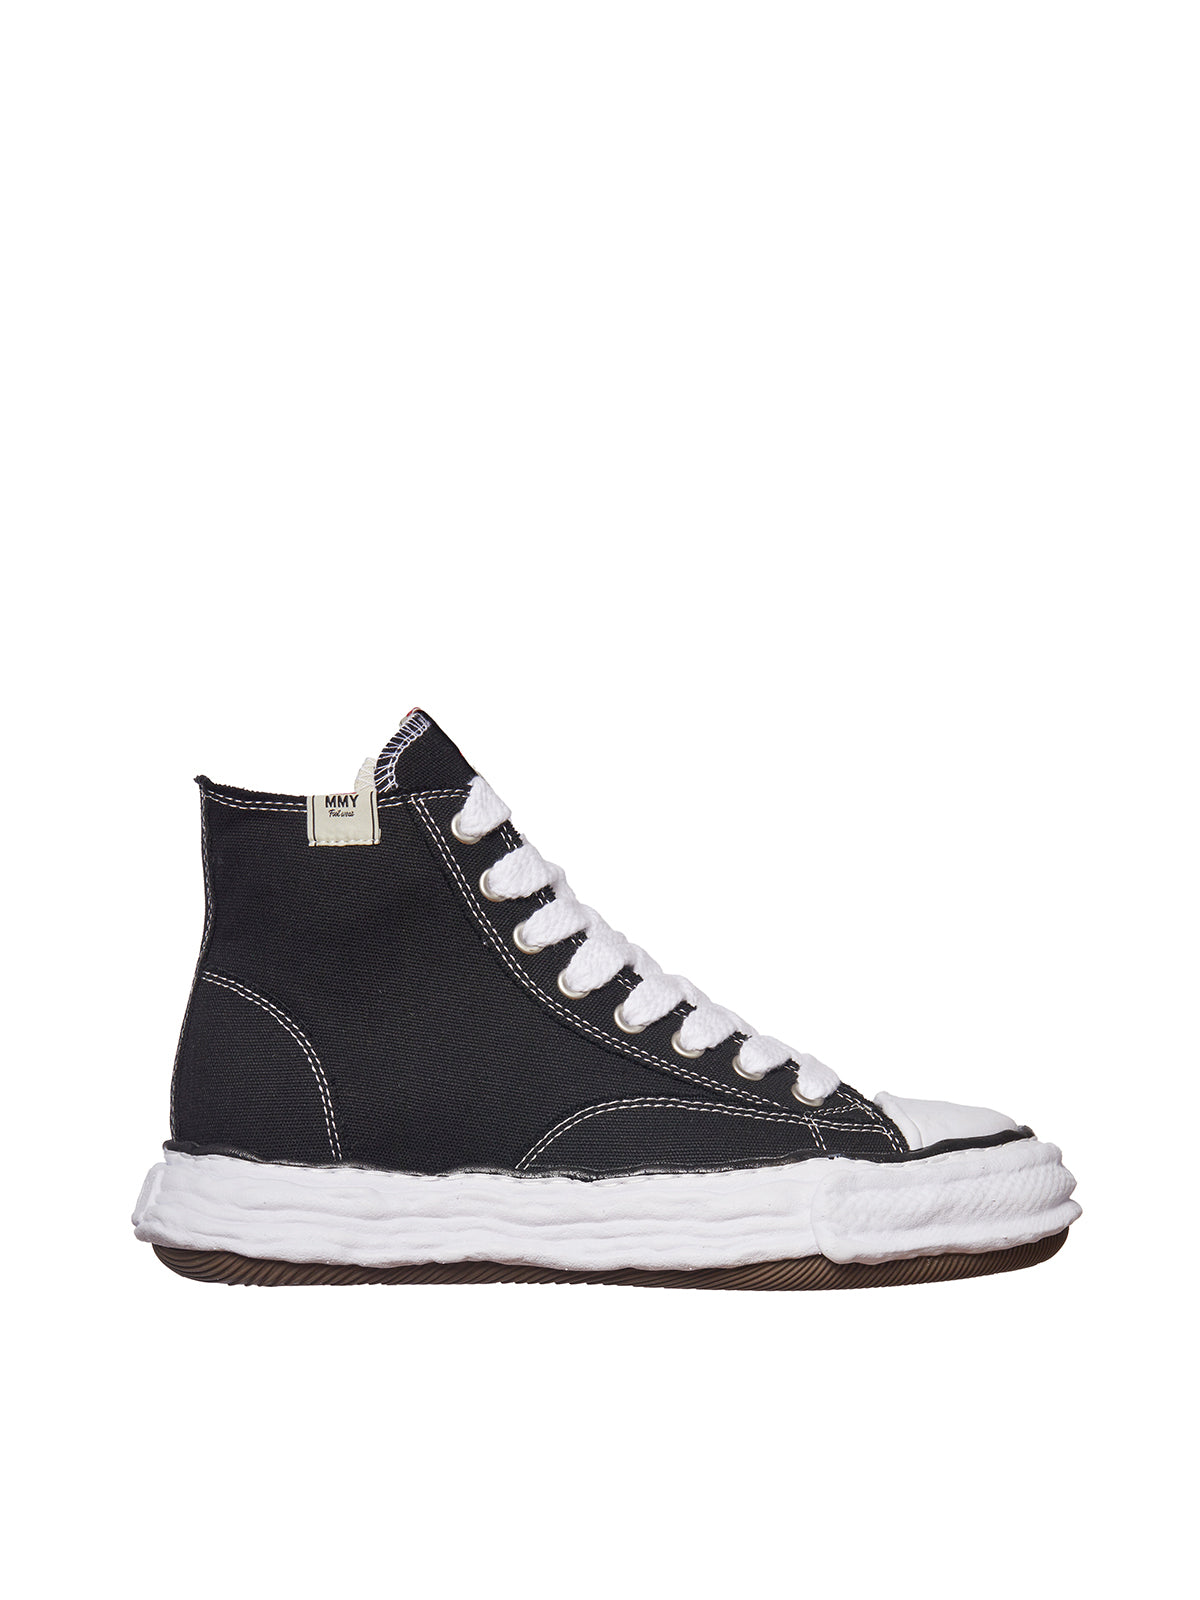 Black Leather High-Top Sneakers for Men